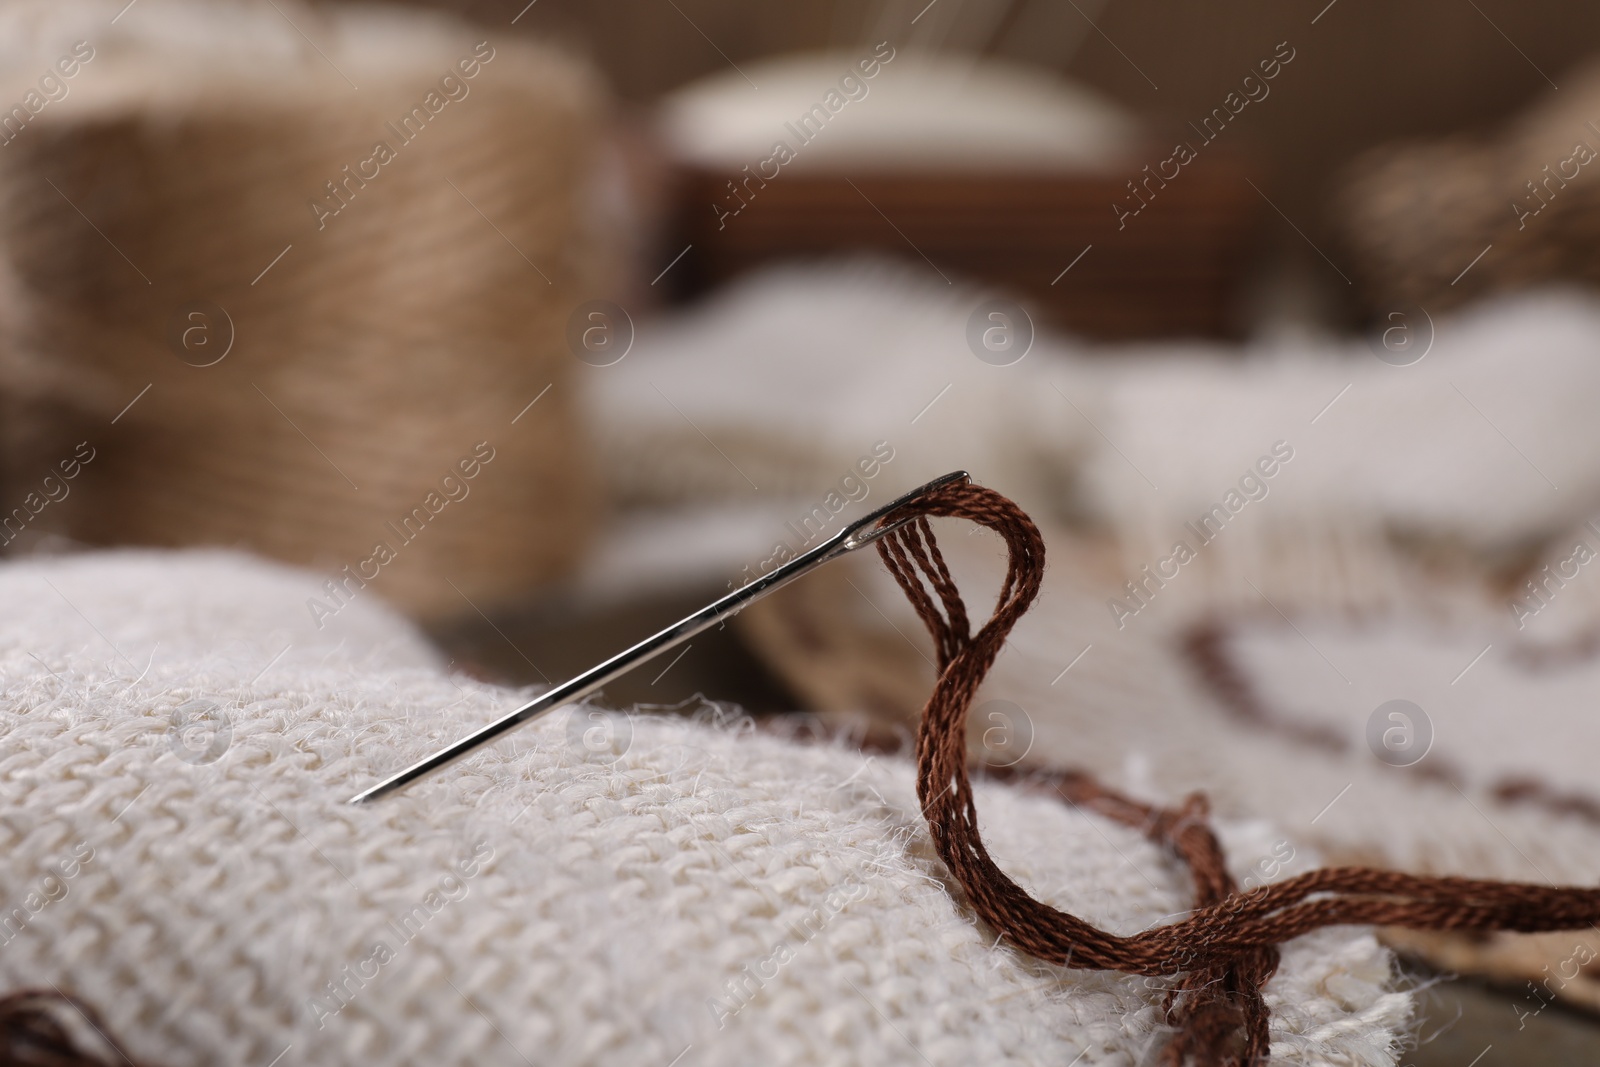 Photo of Heart made of burlap fabric with embroidery, needle and thread on table, closeup